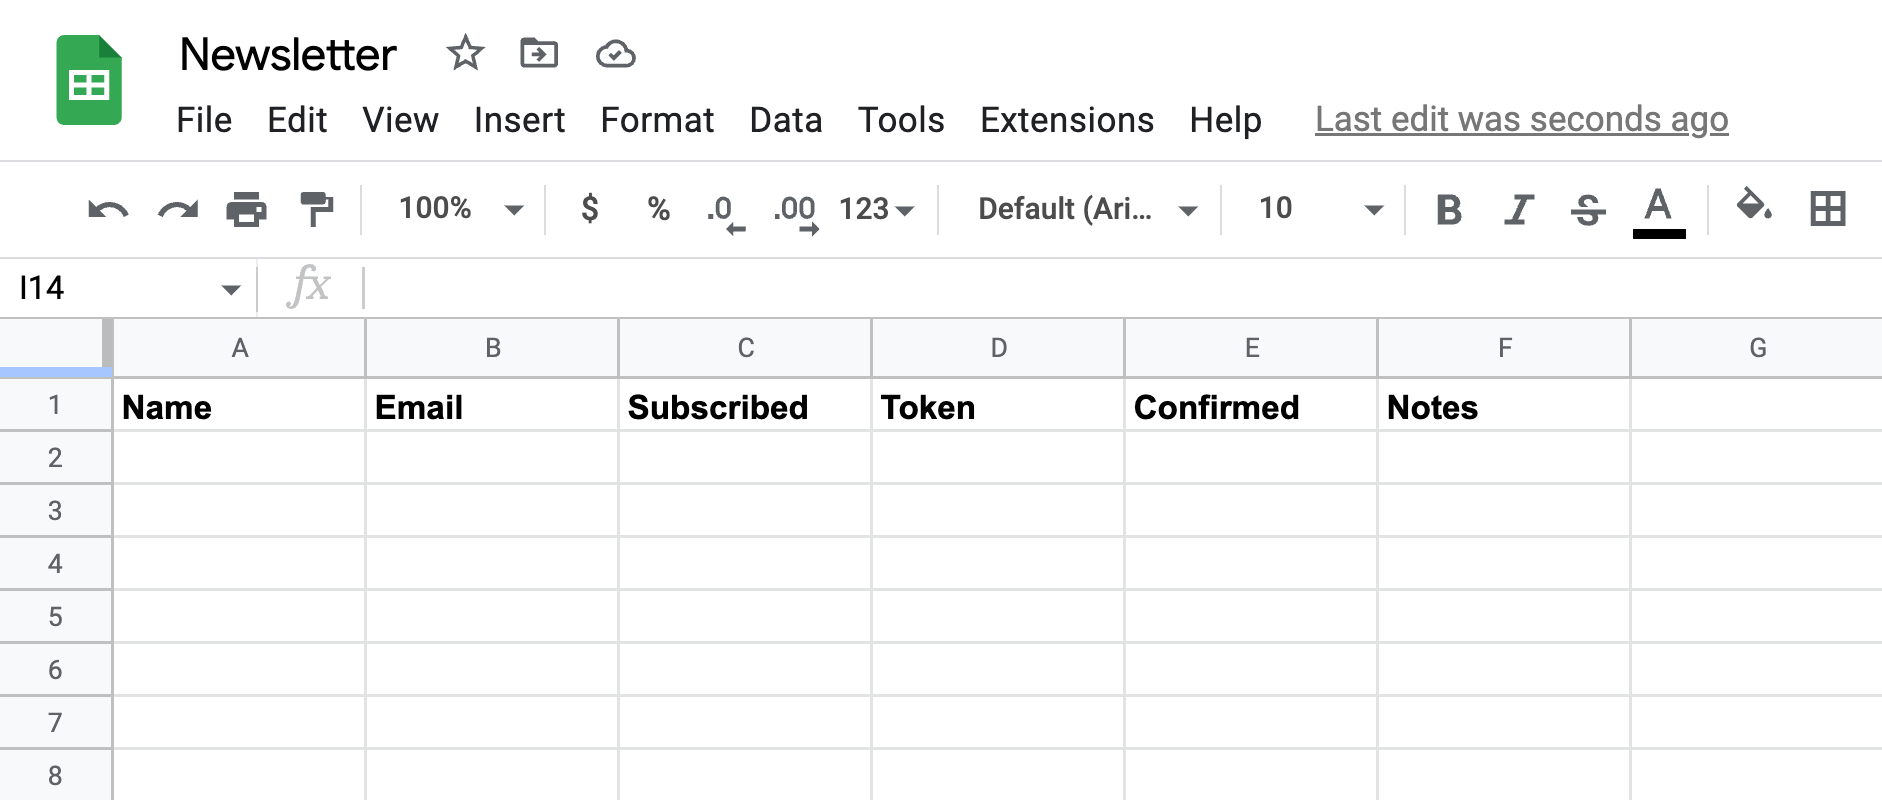 This is the newsletter spreadsheet at the time of writing. Subscribe now and be the first!